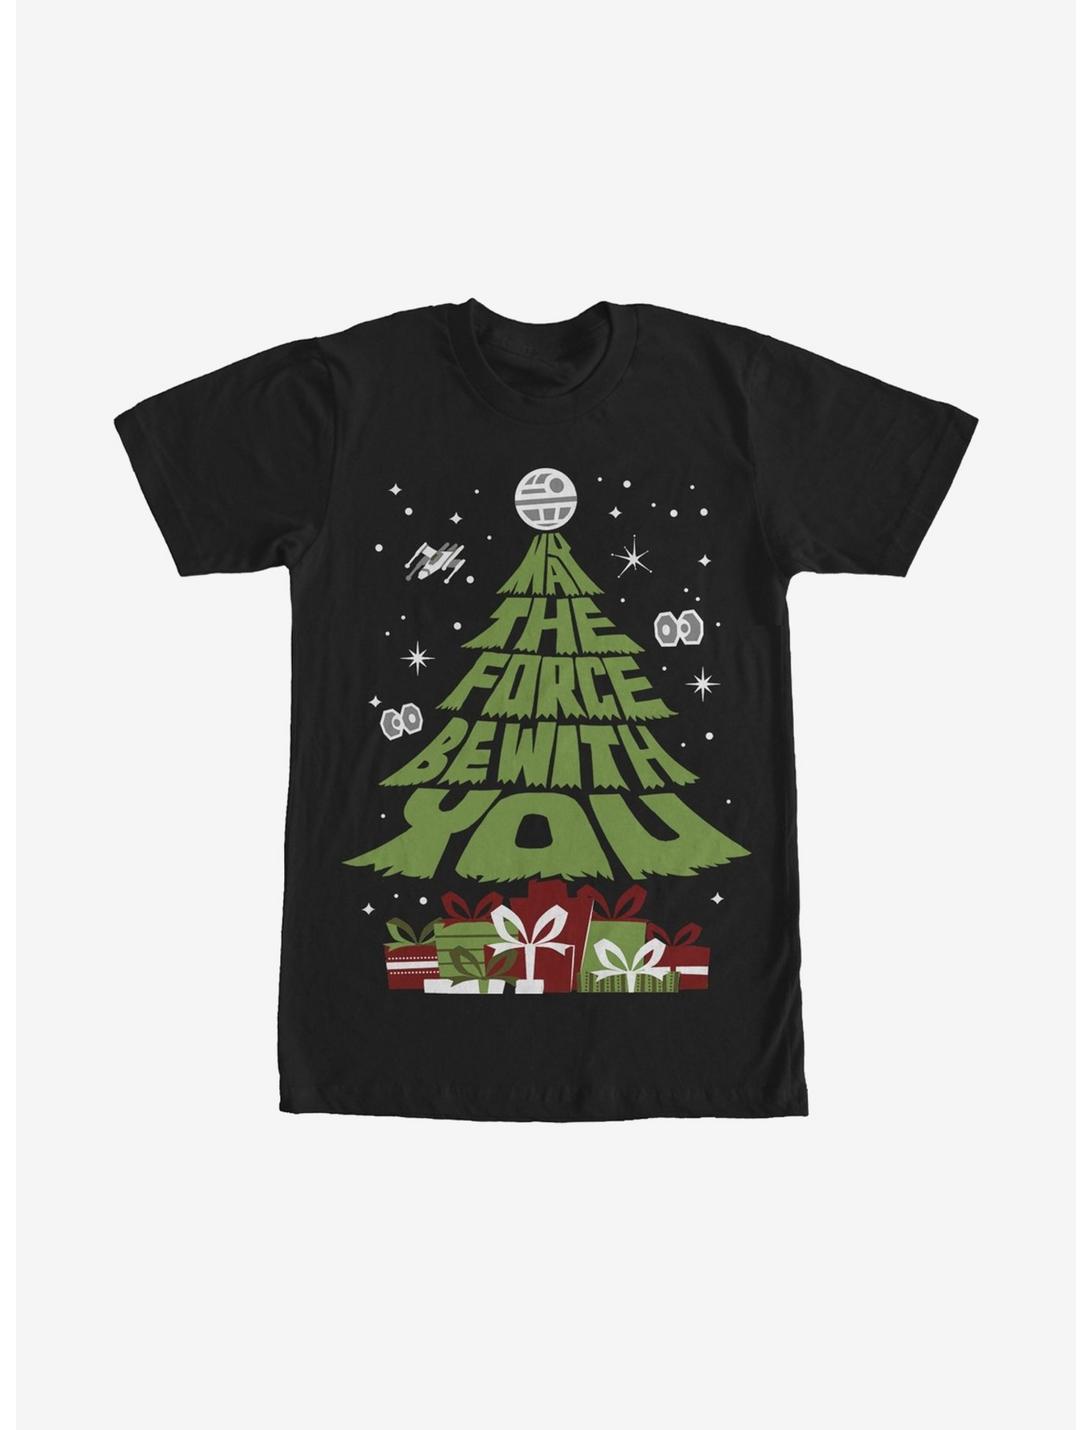 Star Wars May the Christmas Gifts Be With You T-Shirt, BLACK, hi-res